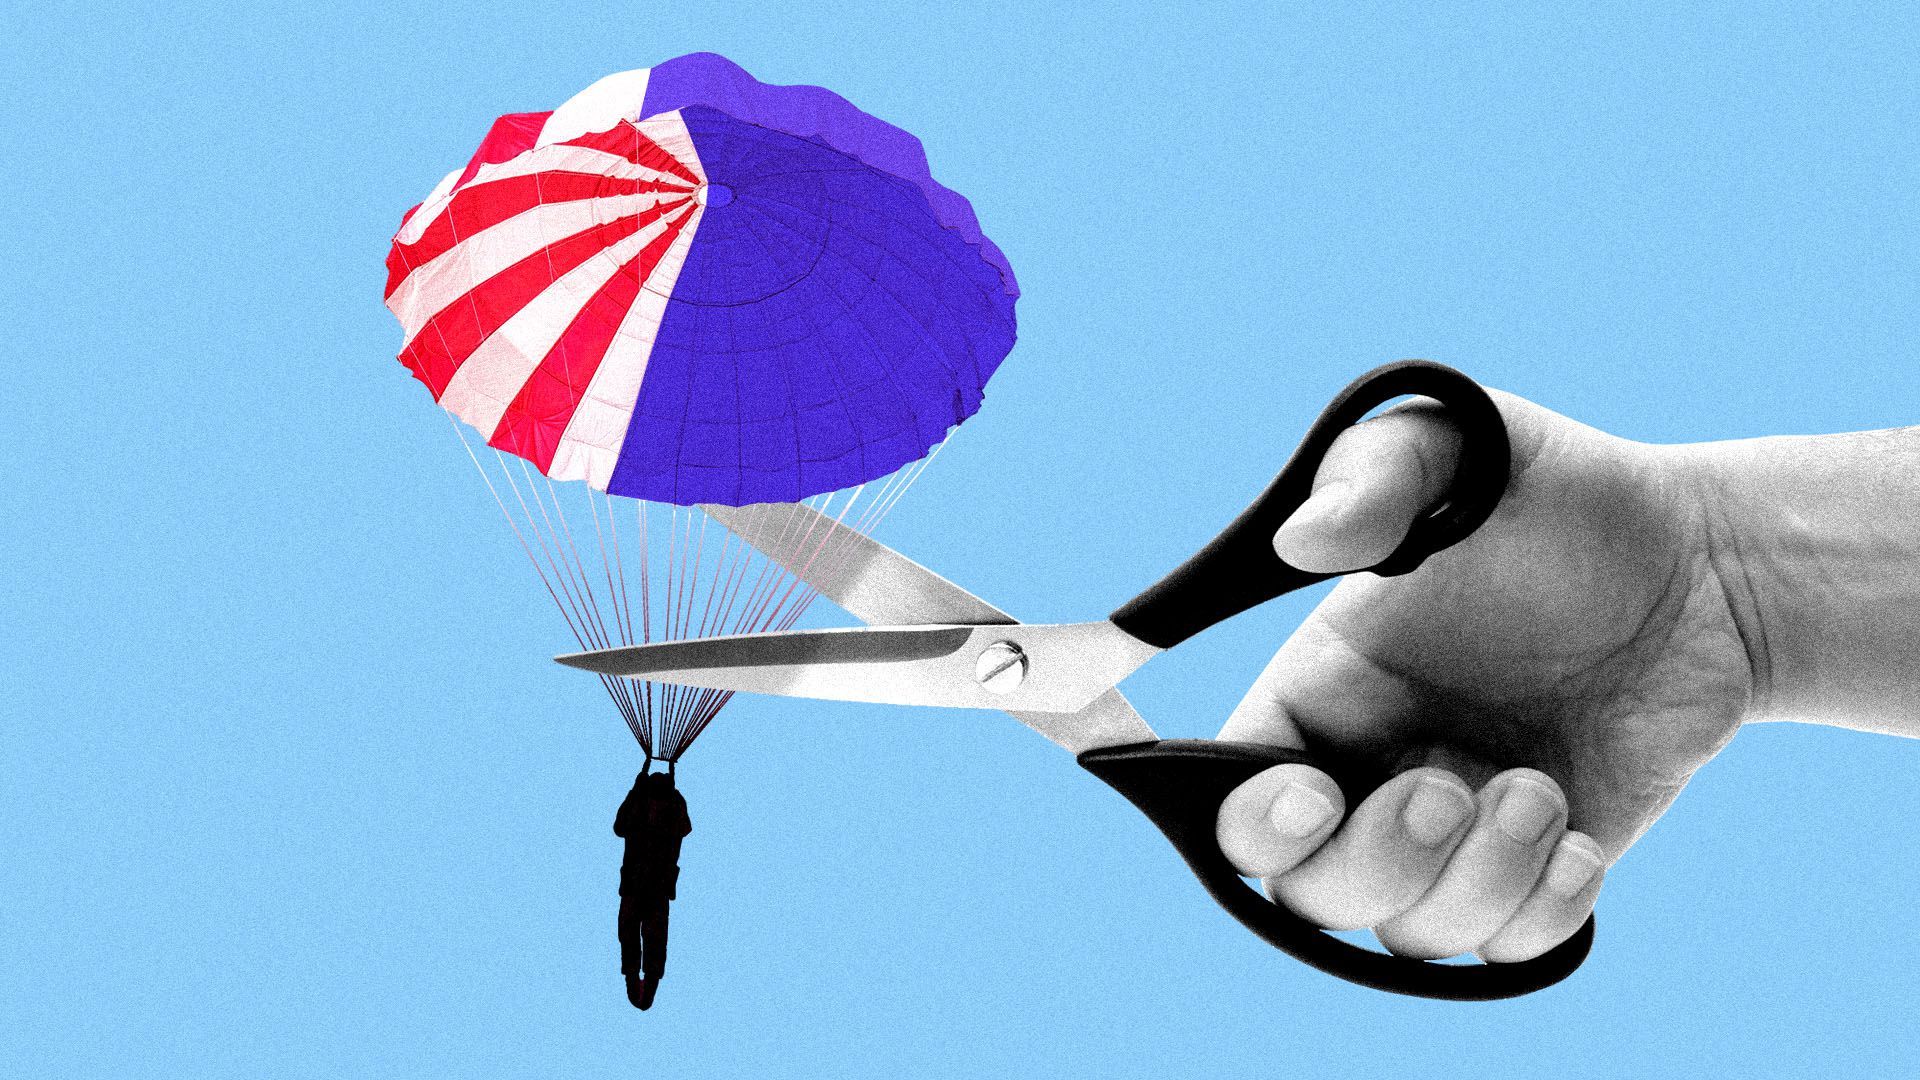 Illustration of scissors snipping a man with a parachute